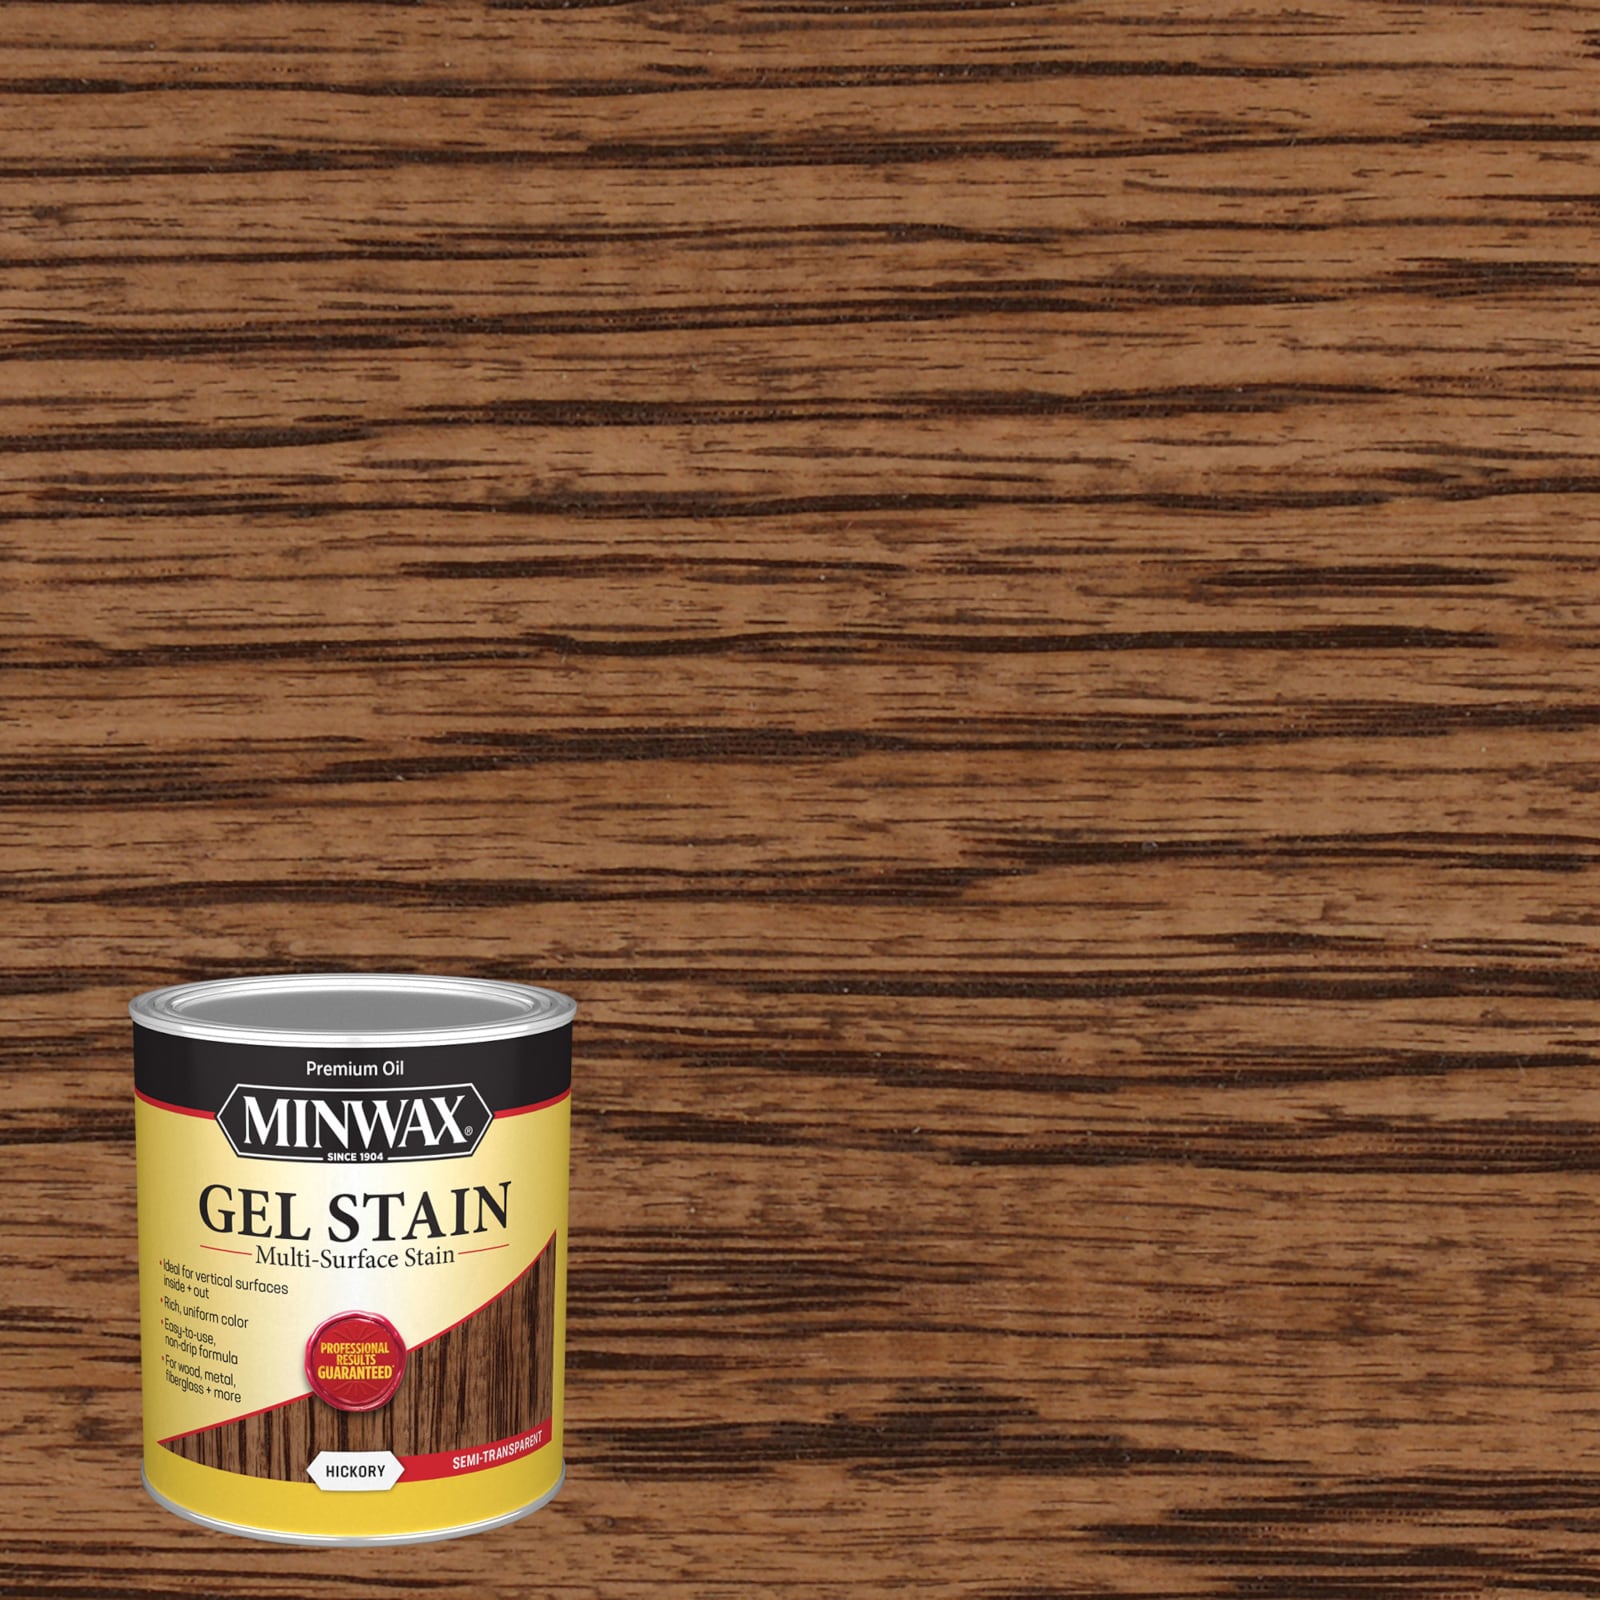 Get rid of dated cabinetry with this easy DIY gel stain project